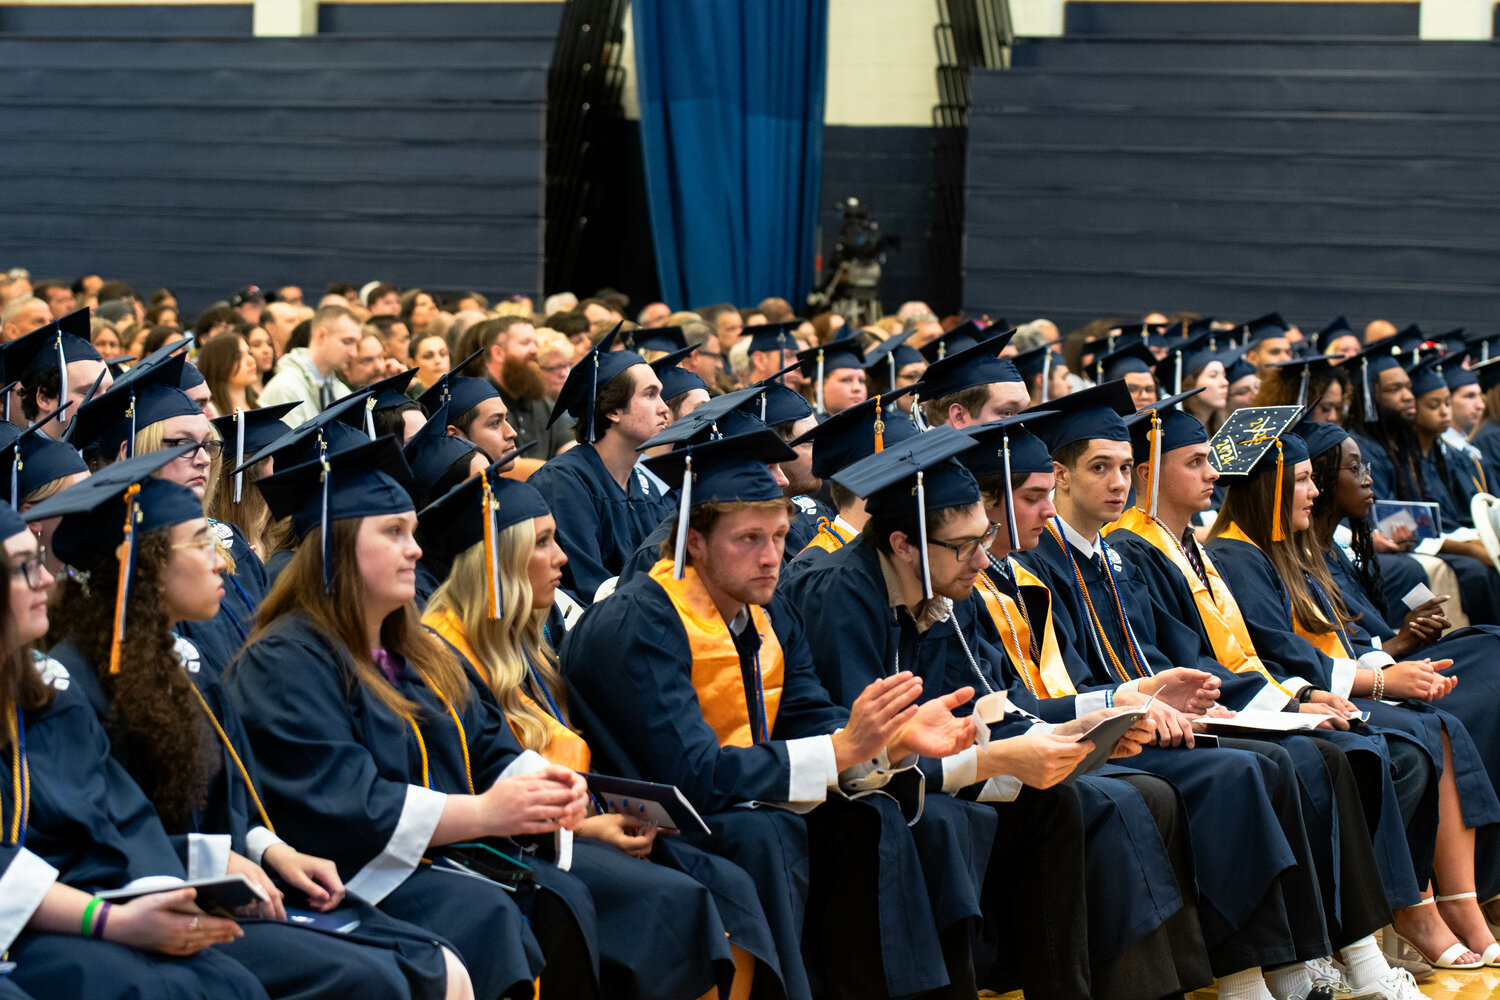 Bucks County Community College graduated 537 students in a series of commencement ceremonies during the week of May 13.